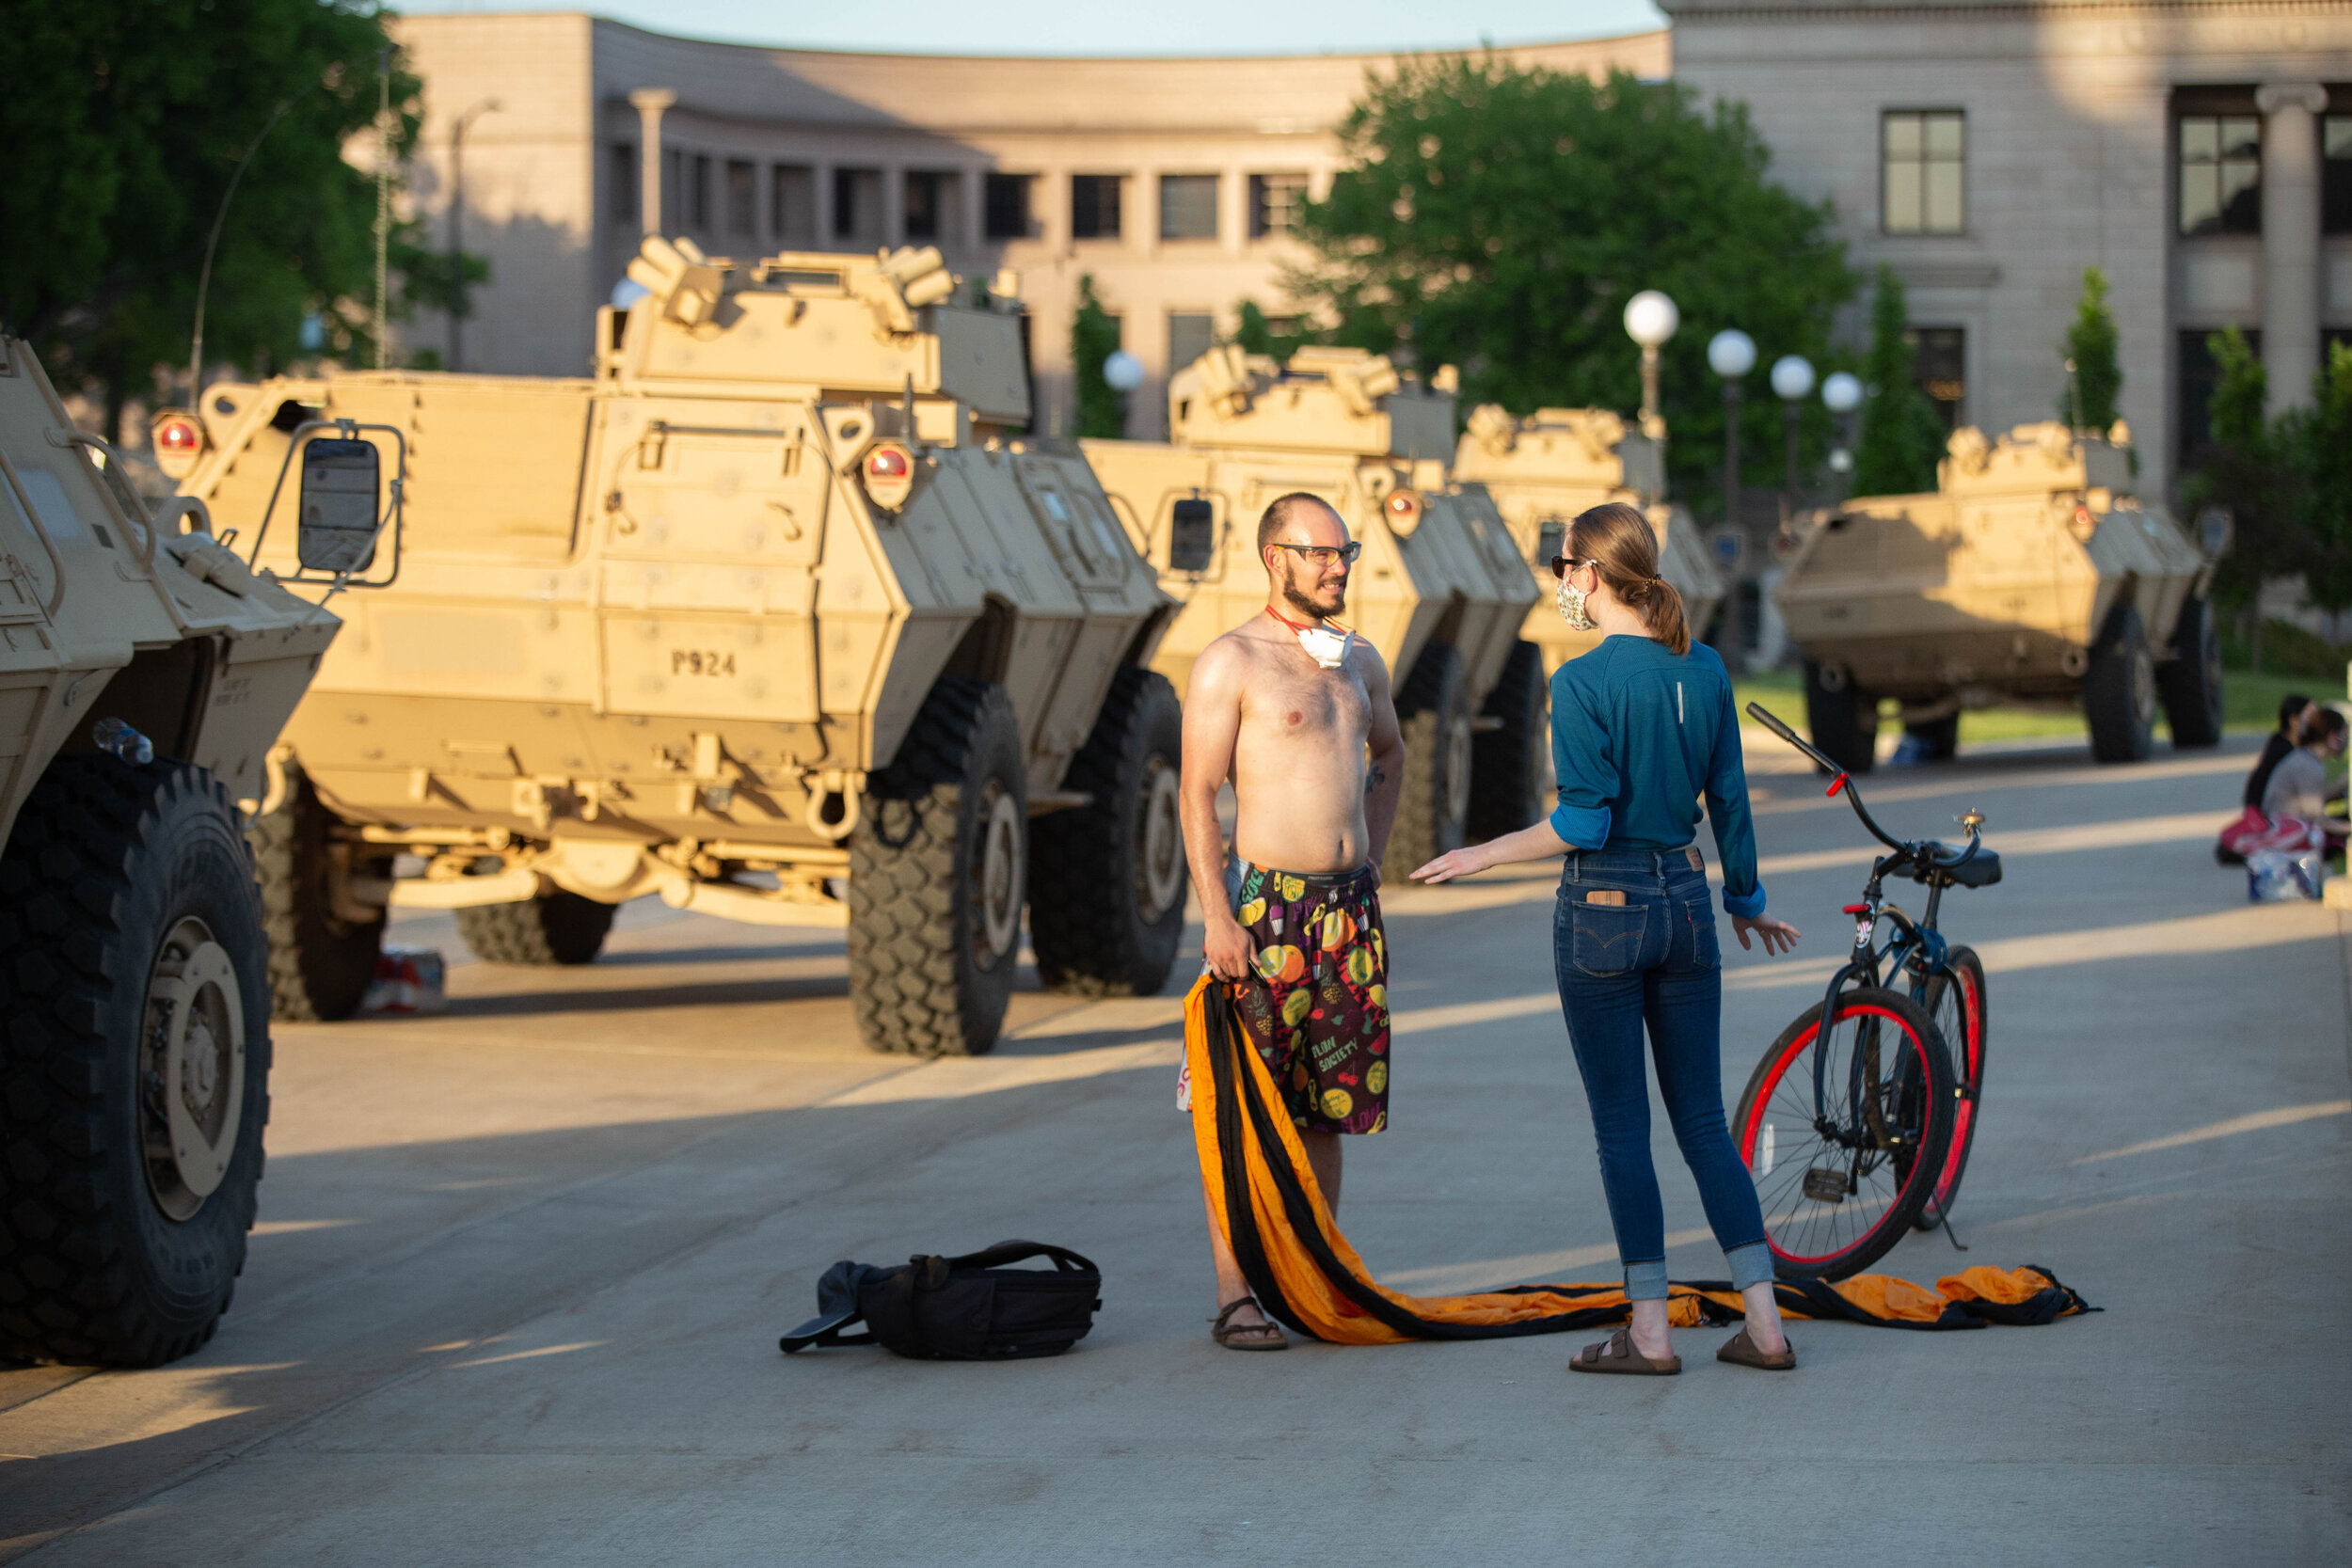  A man that was trying to hang a hammock between a fence and armored vehicle is told by protesters that he needed to stop at the Minnesota State Capitol building in Saint Paul, Minnesota on June 1, 2020. Chris Juhn/Zenger 